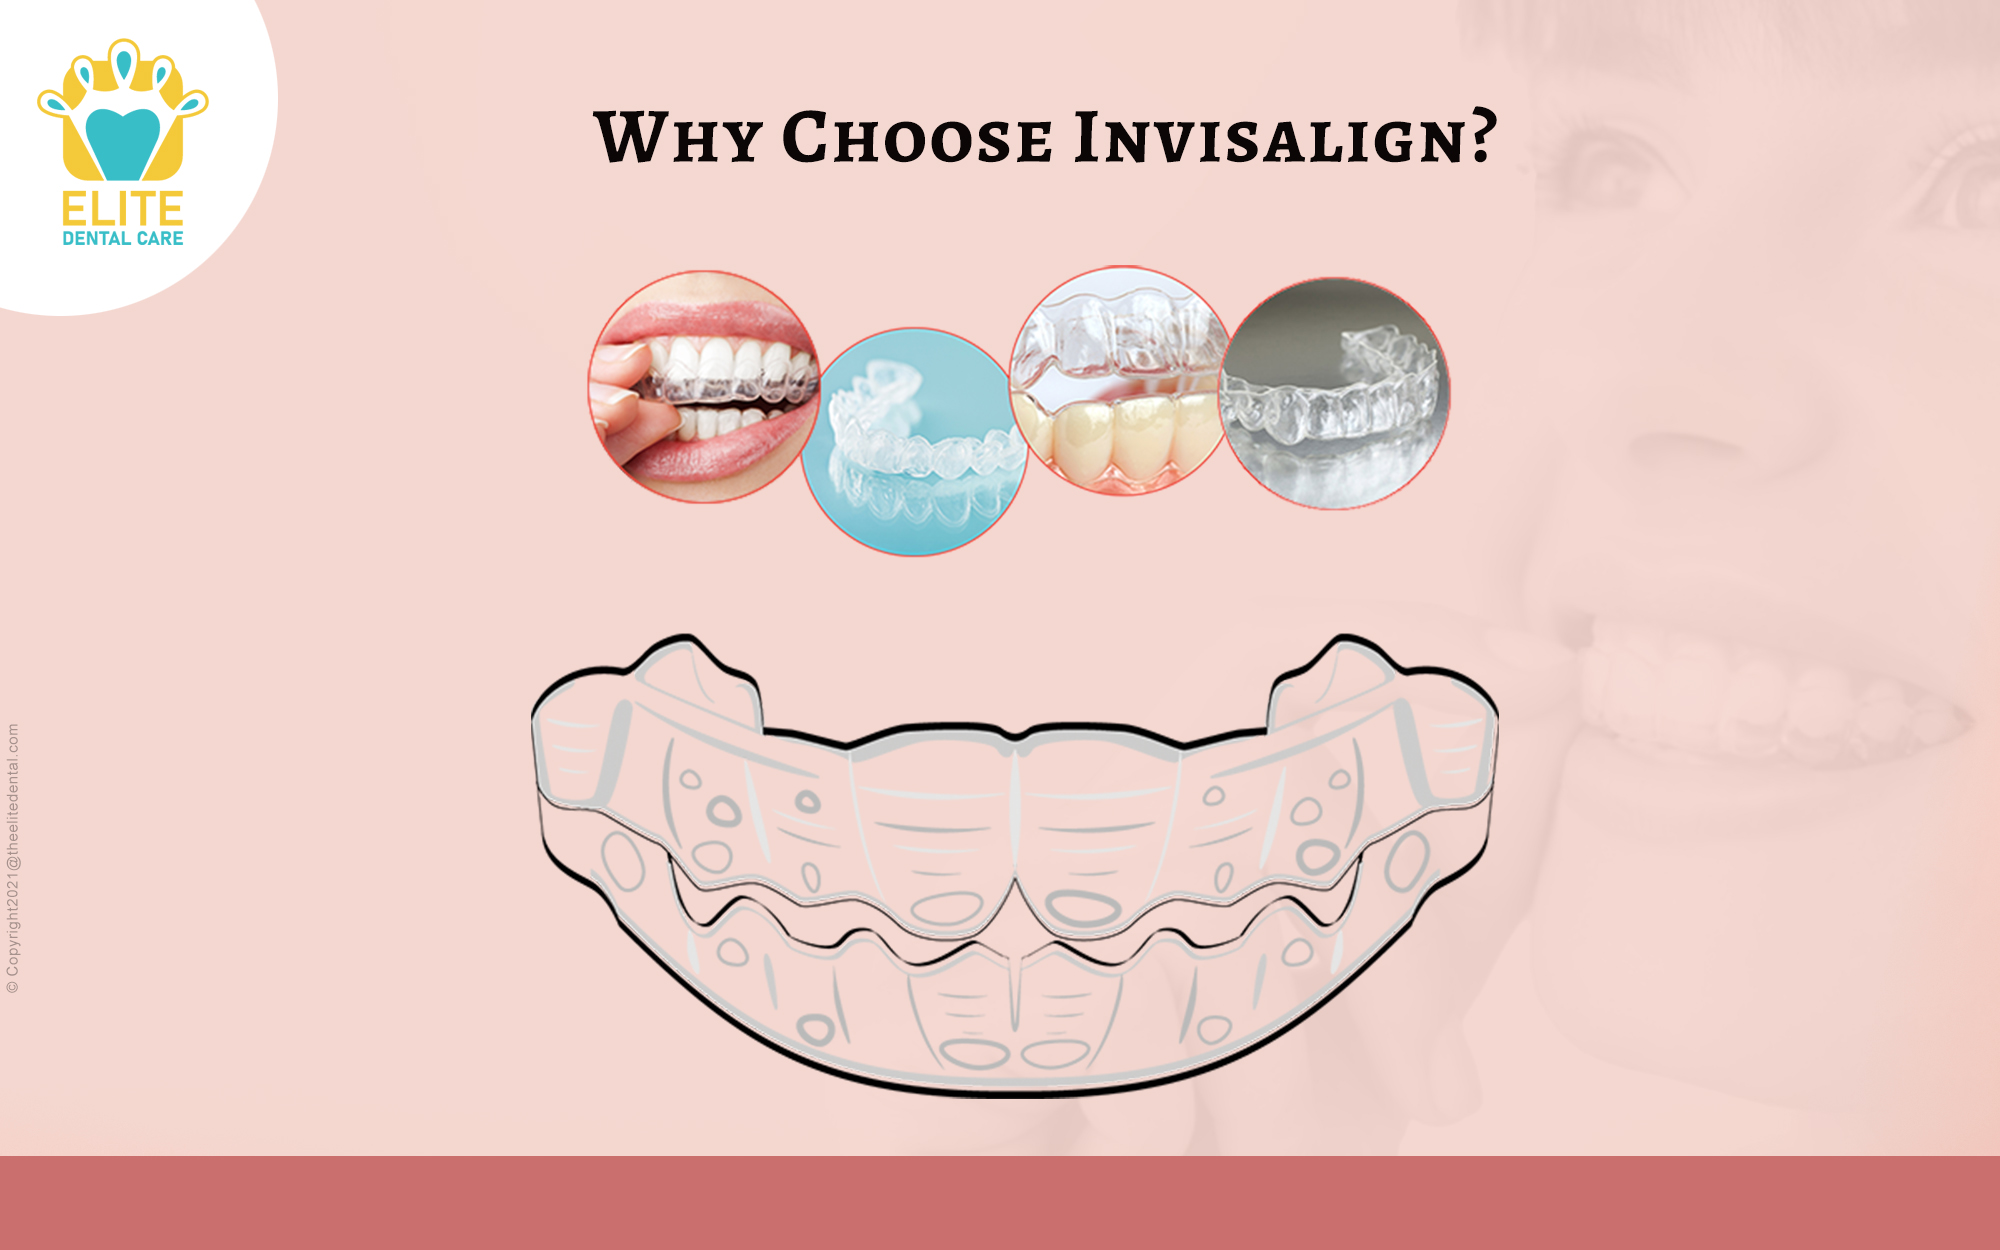 Why choose Invisalign?